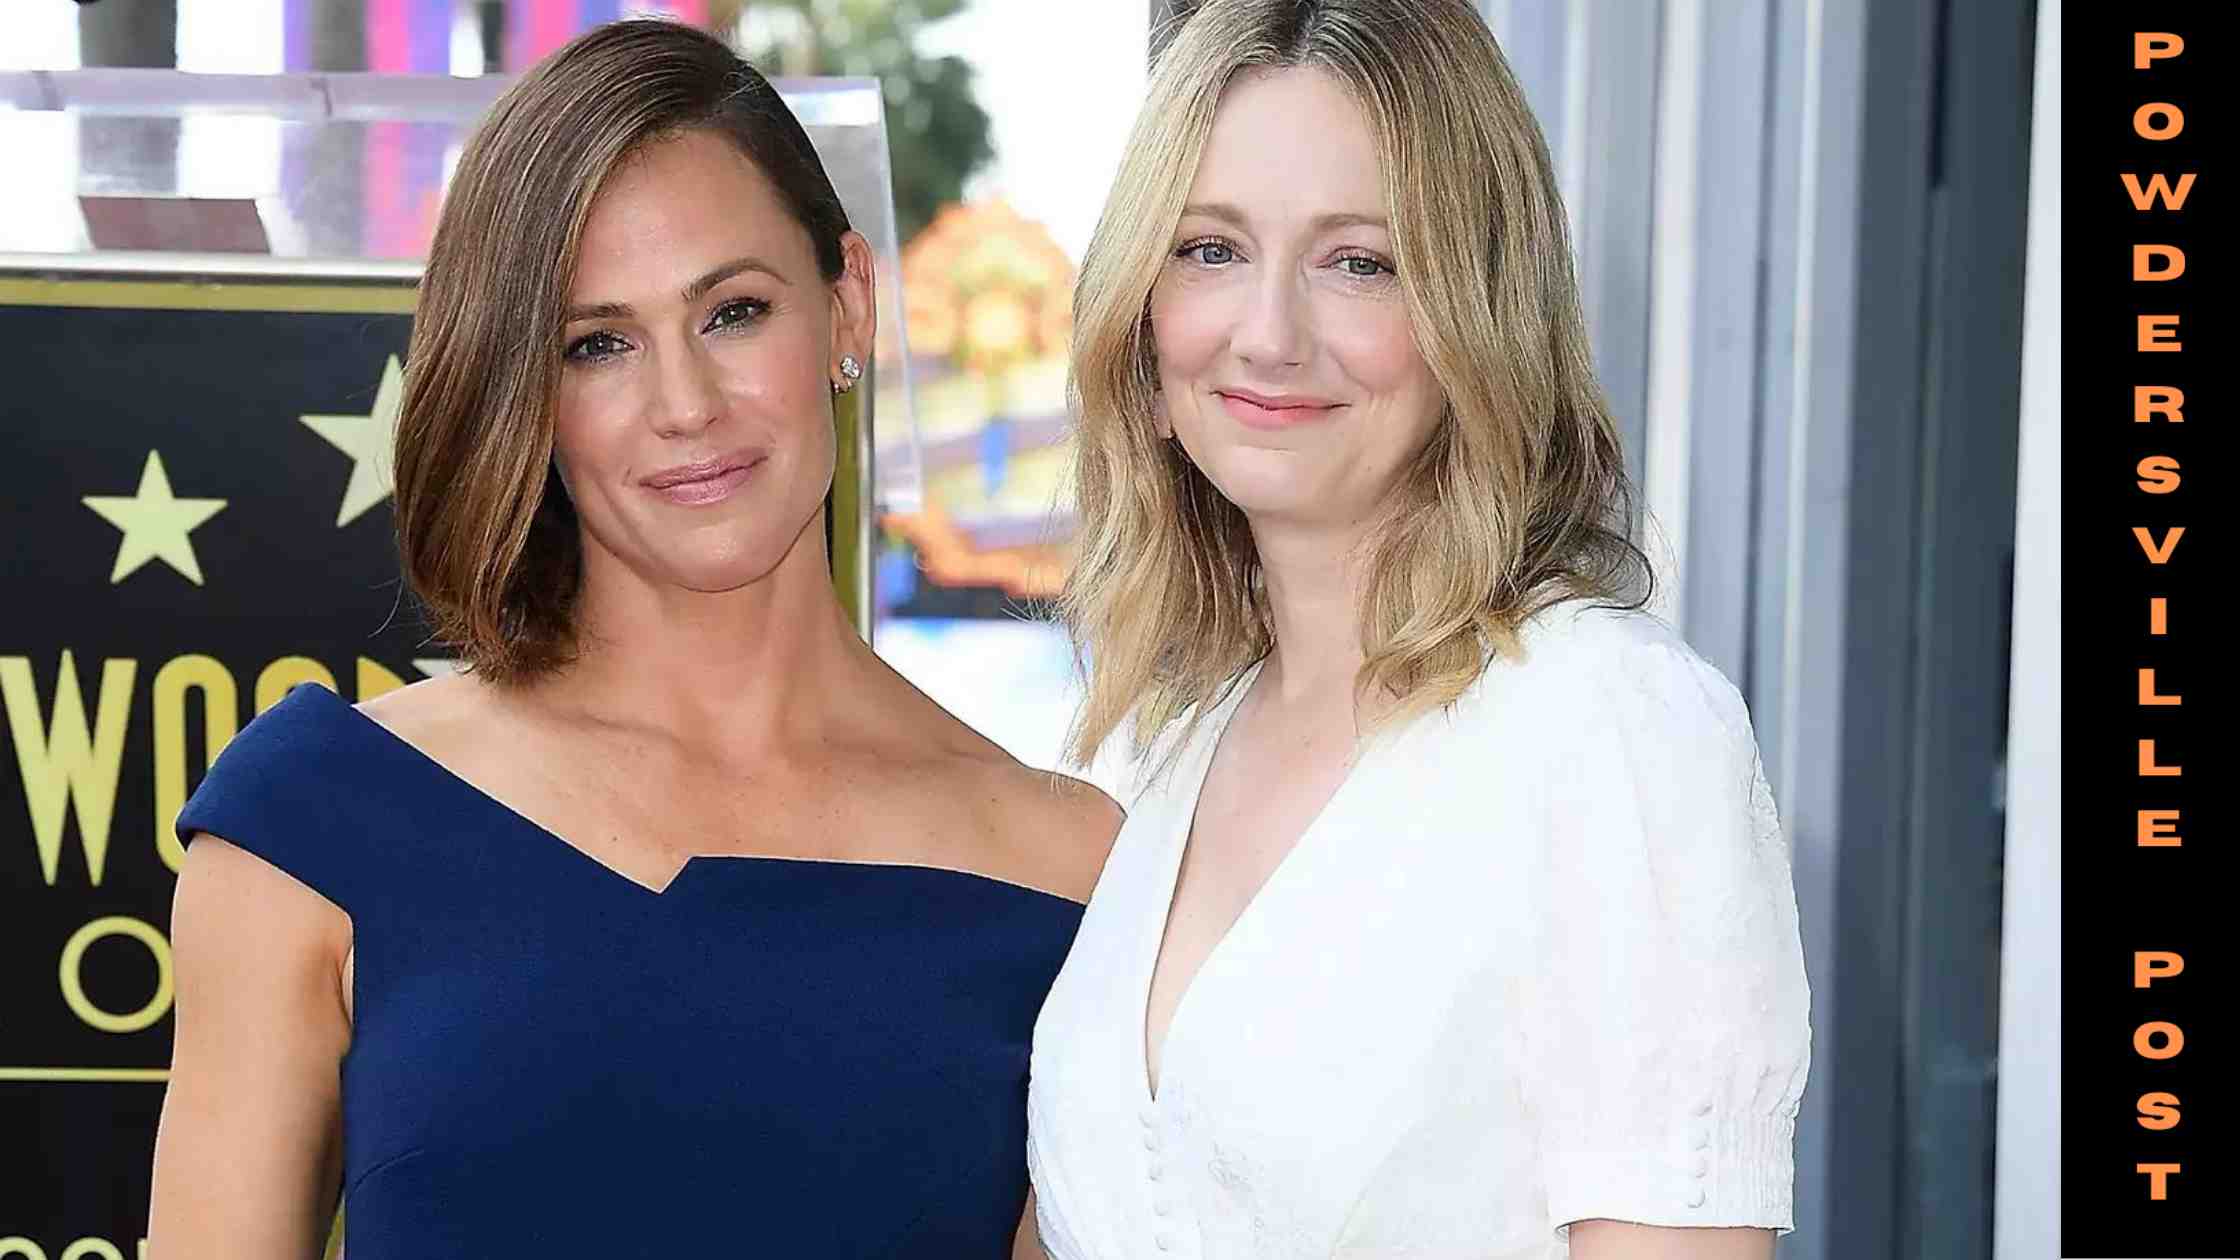 13 going on 30 Reunion Works Begins!! Jennifer Garner and Judy Greer Once Again United As They Shared Selfies On Social Media